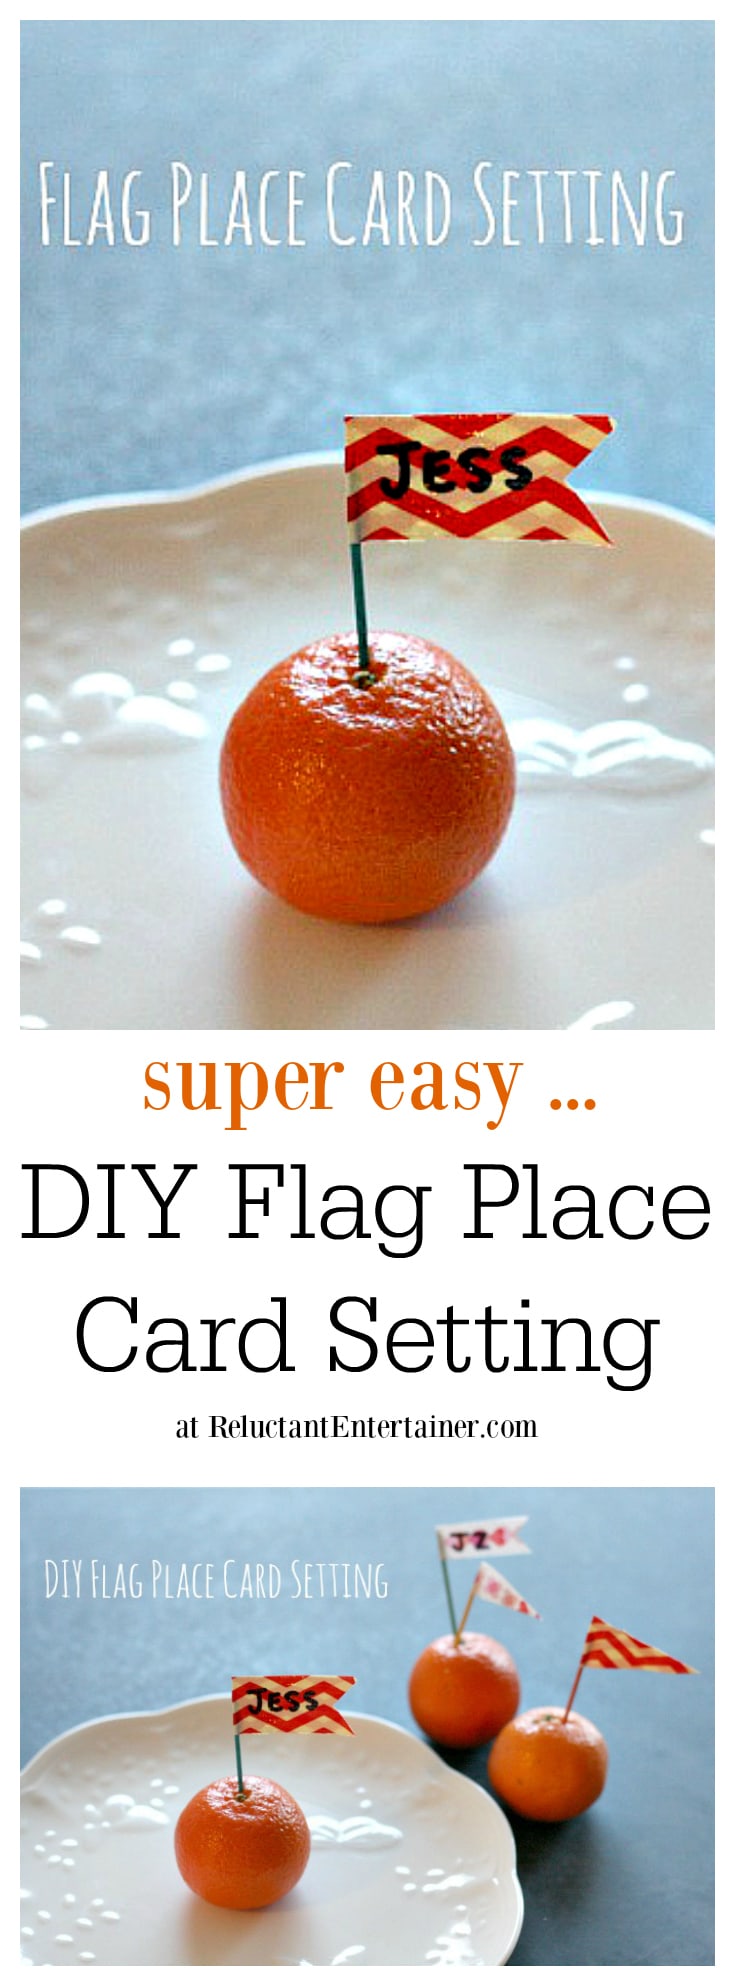 DIY Flag Place Card Setting at ReluctantEntertainer.com